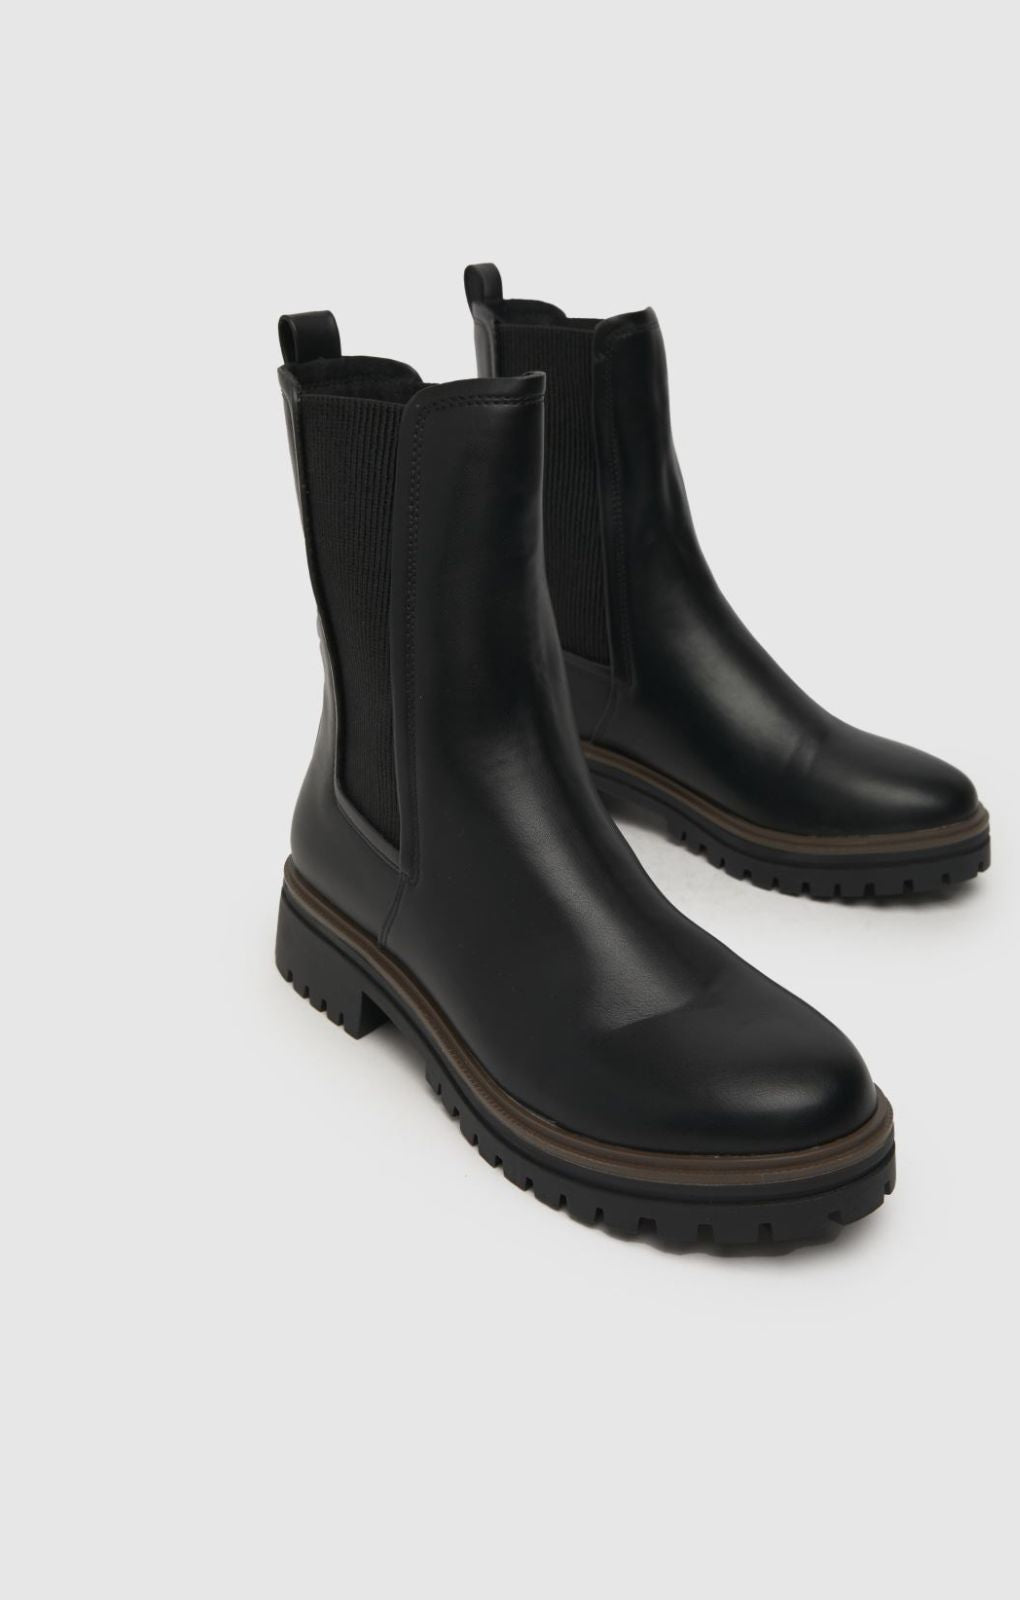 Schuh Amara Chunky Chelsea Boots in Black product image